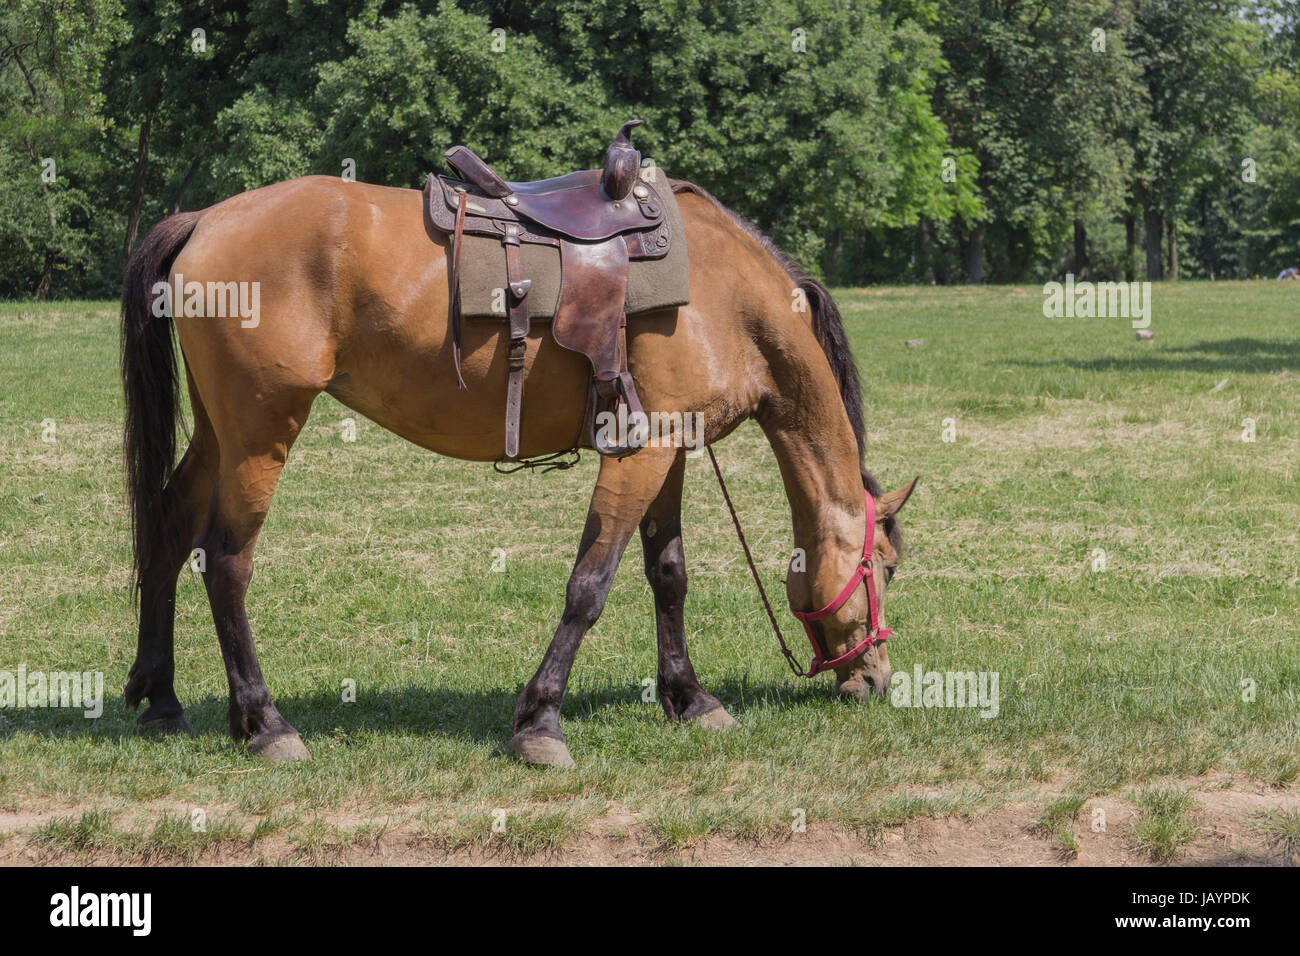 Stock Photography - Horse Eating Grass Stock Photo